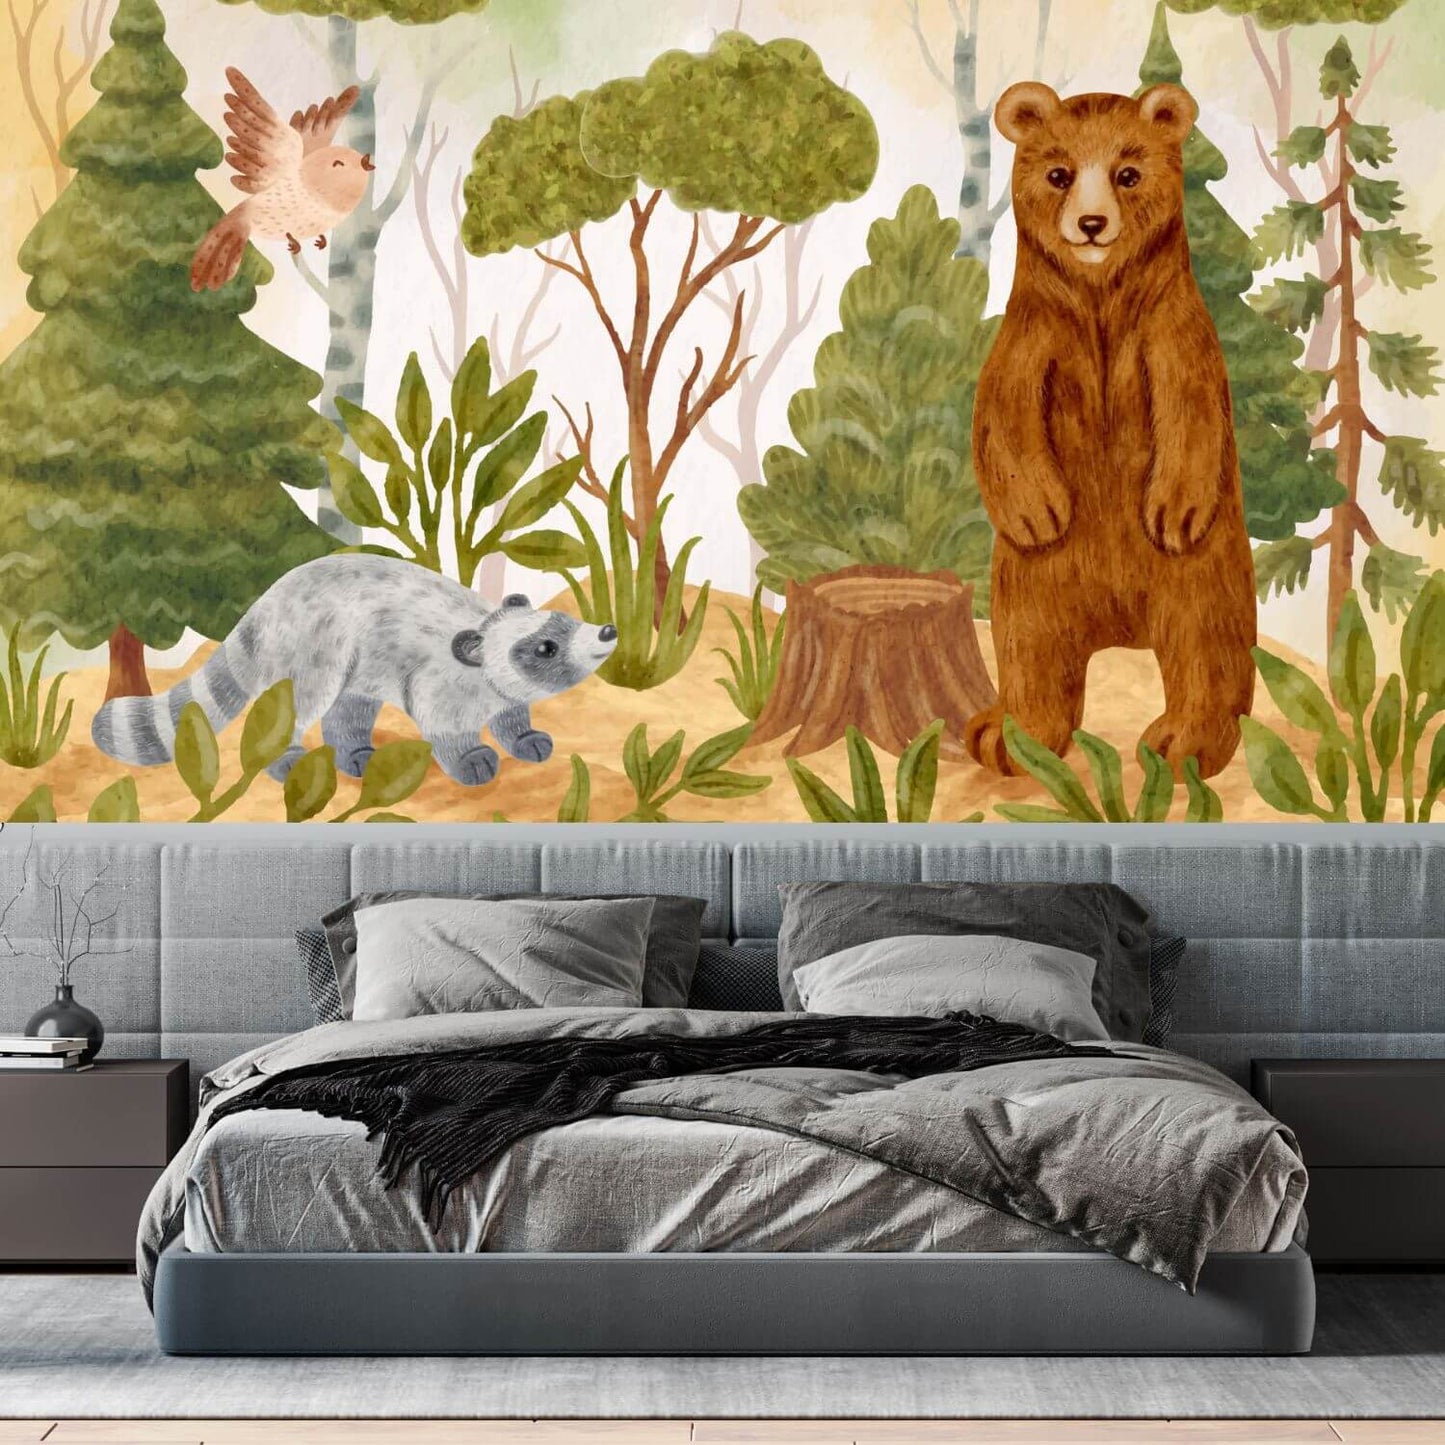 Watercolor Bear and Raccoon Forest Mural Wallpaper (SqM)